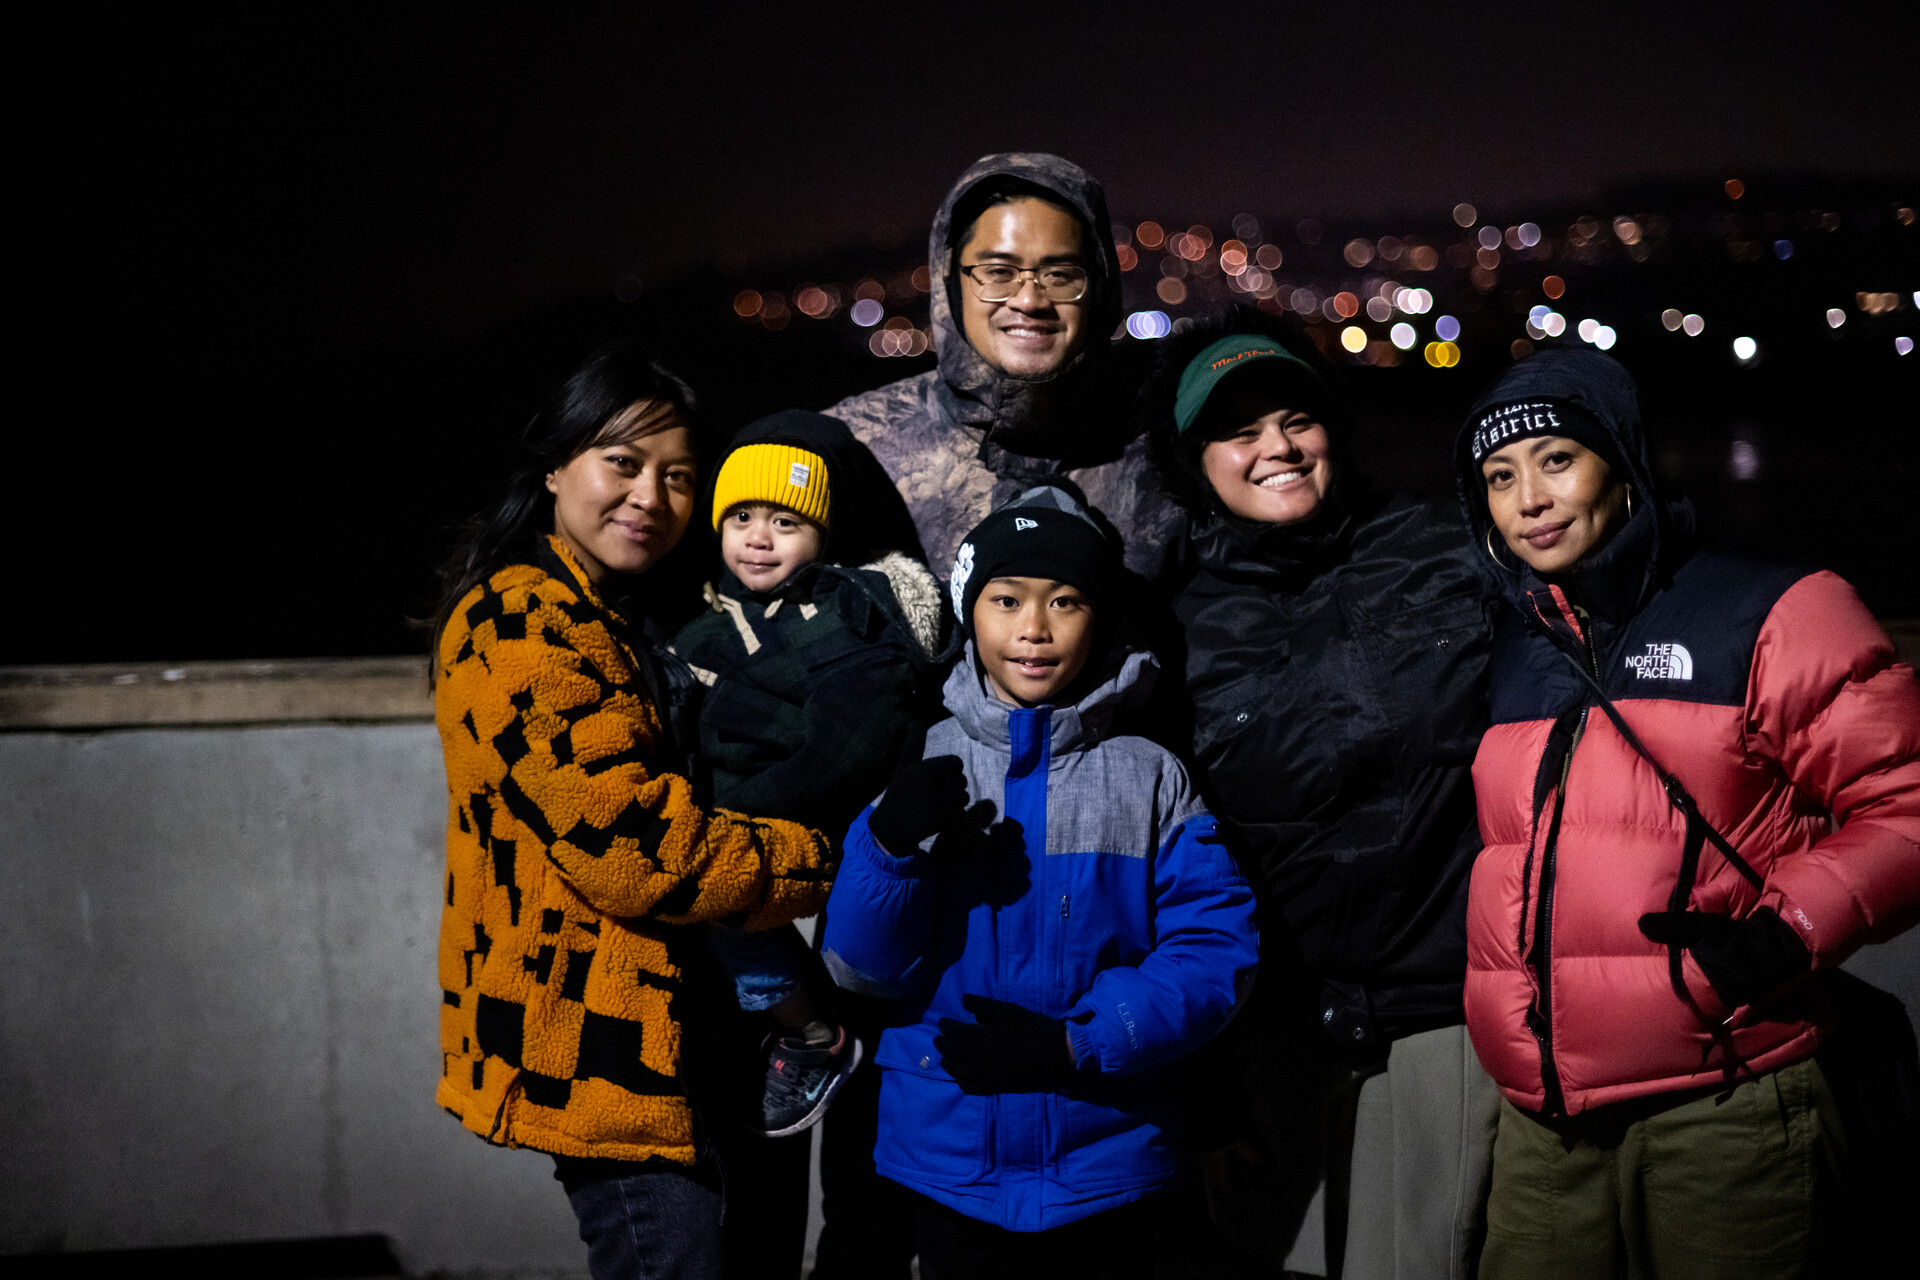 A nighttime family portrait taken on the pier in Pacifica.